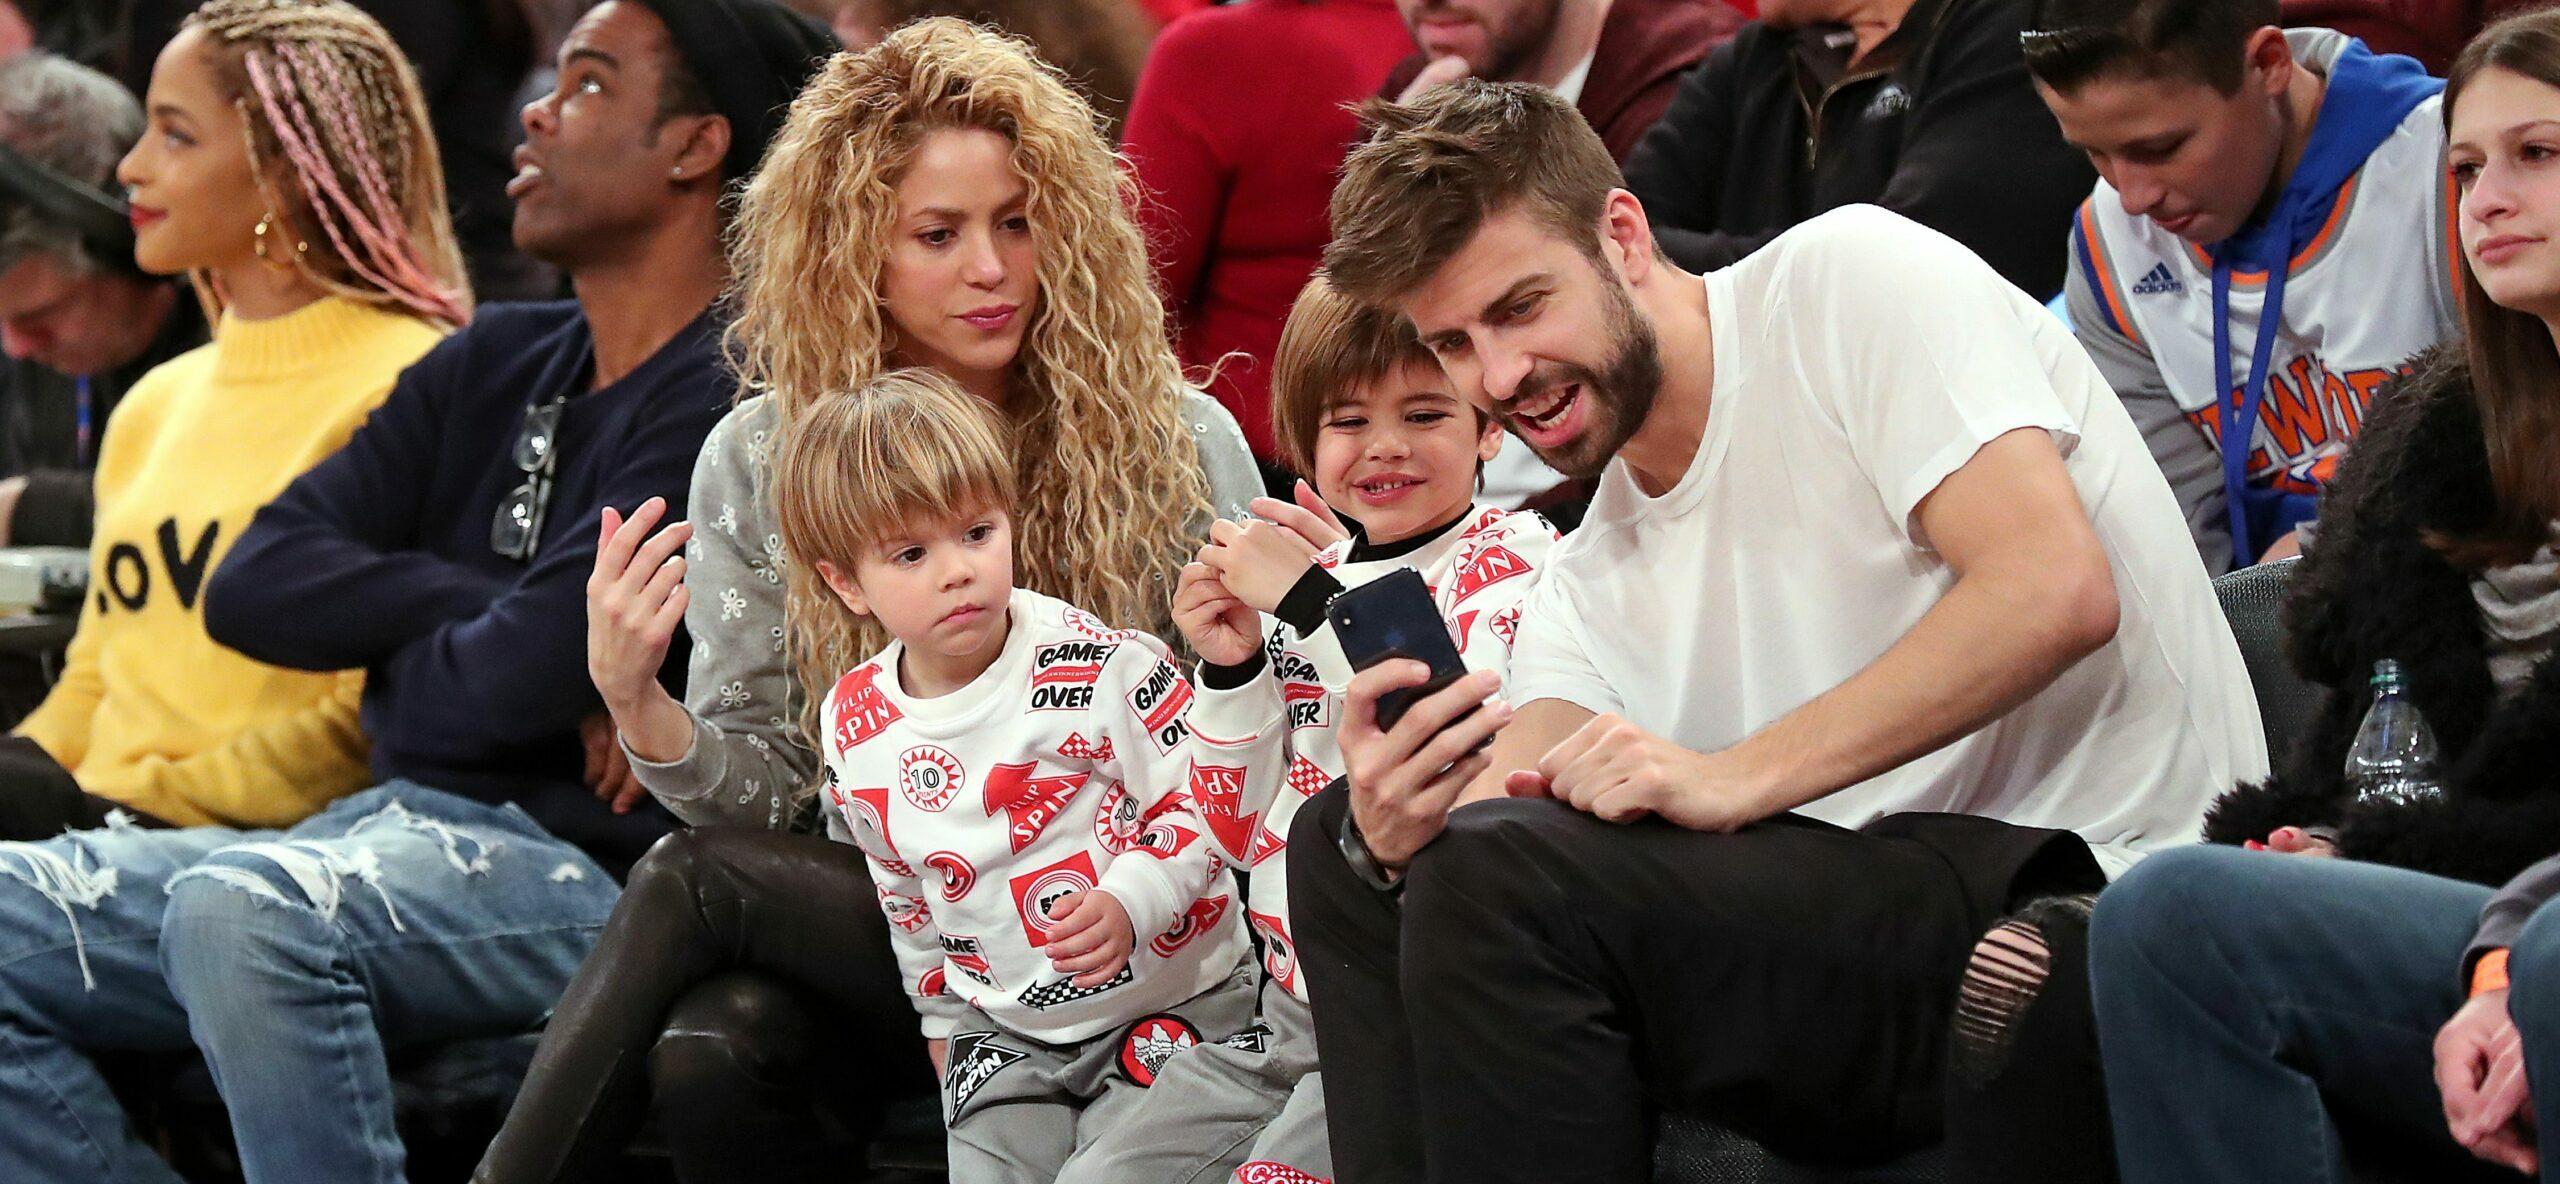 Shakira Appears Worn Out & Fed-Up Following Gerard Piqué Breakup!